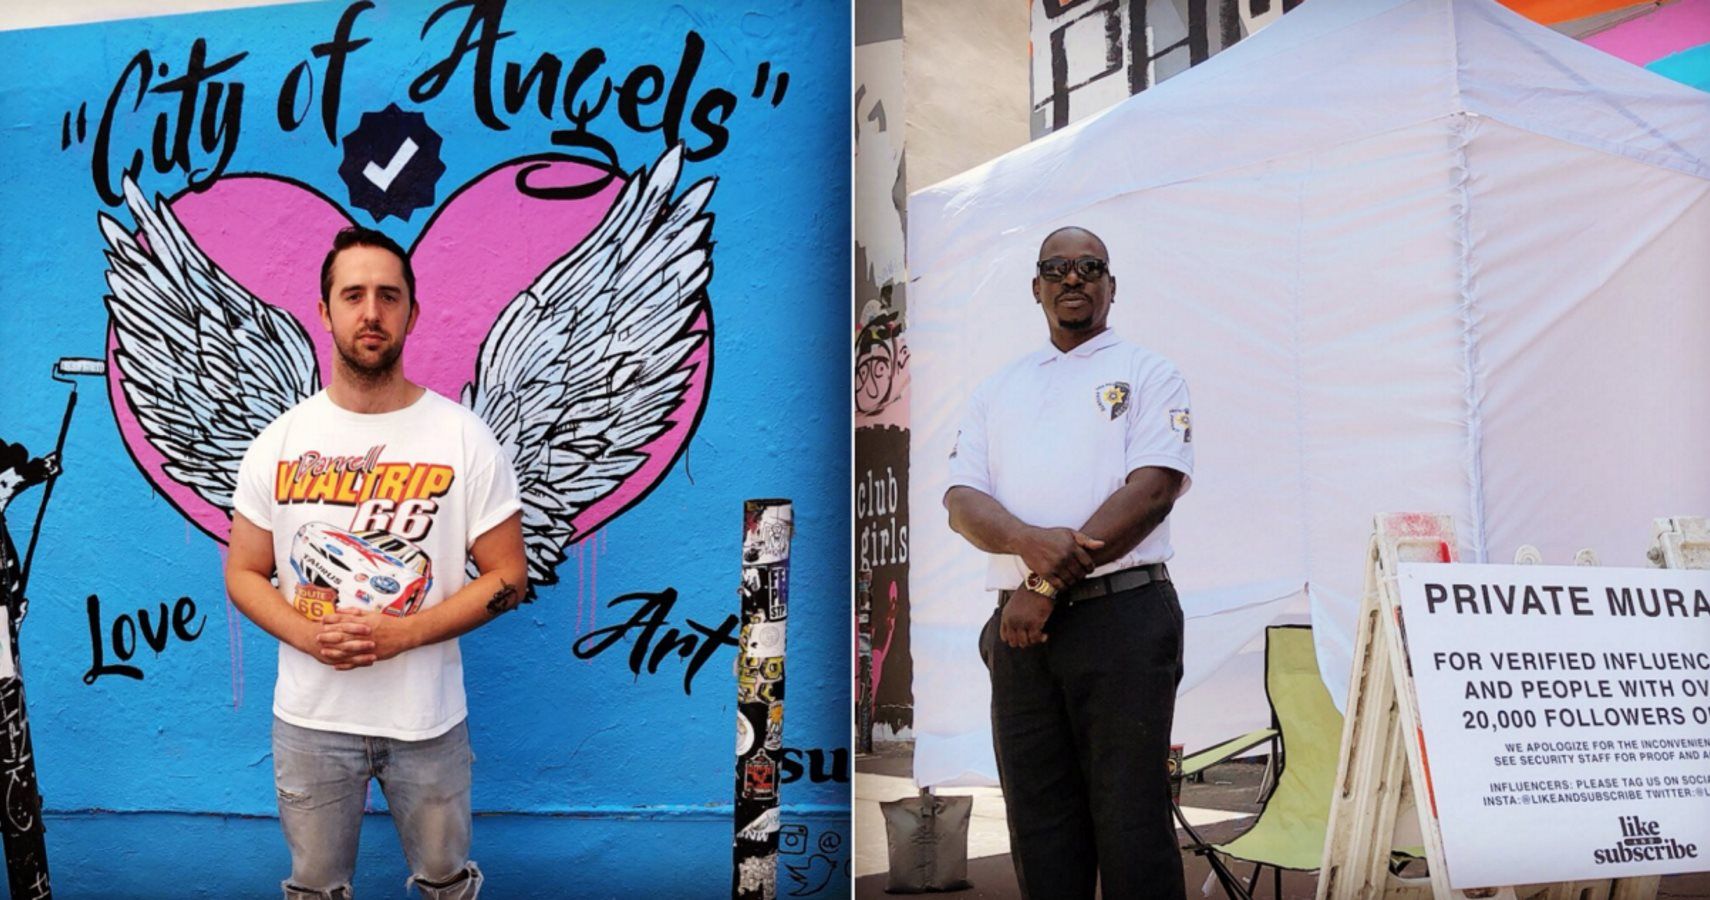 Los Angeles Has An 'Influencers-Only' Mural You Can Only Post With After 20,000 Followers